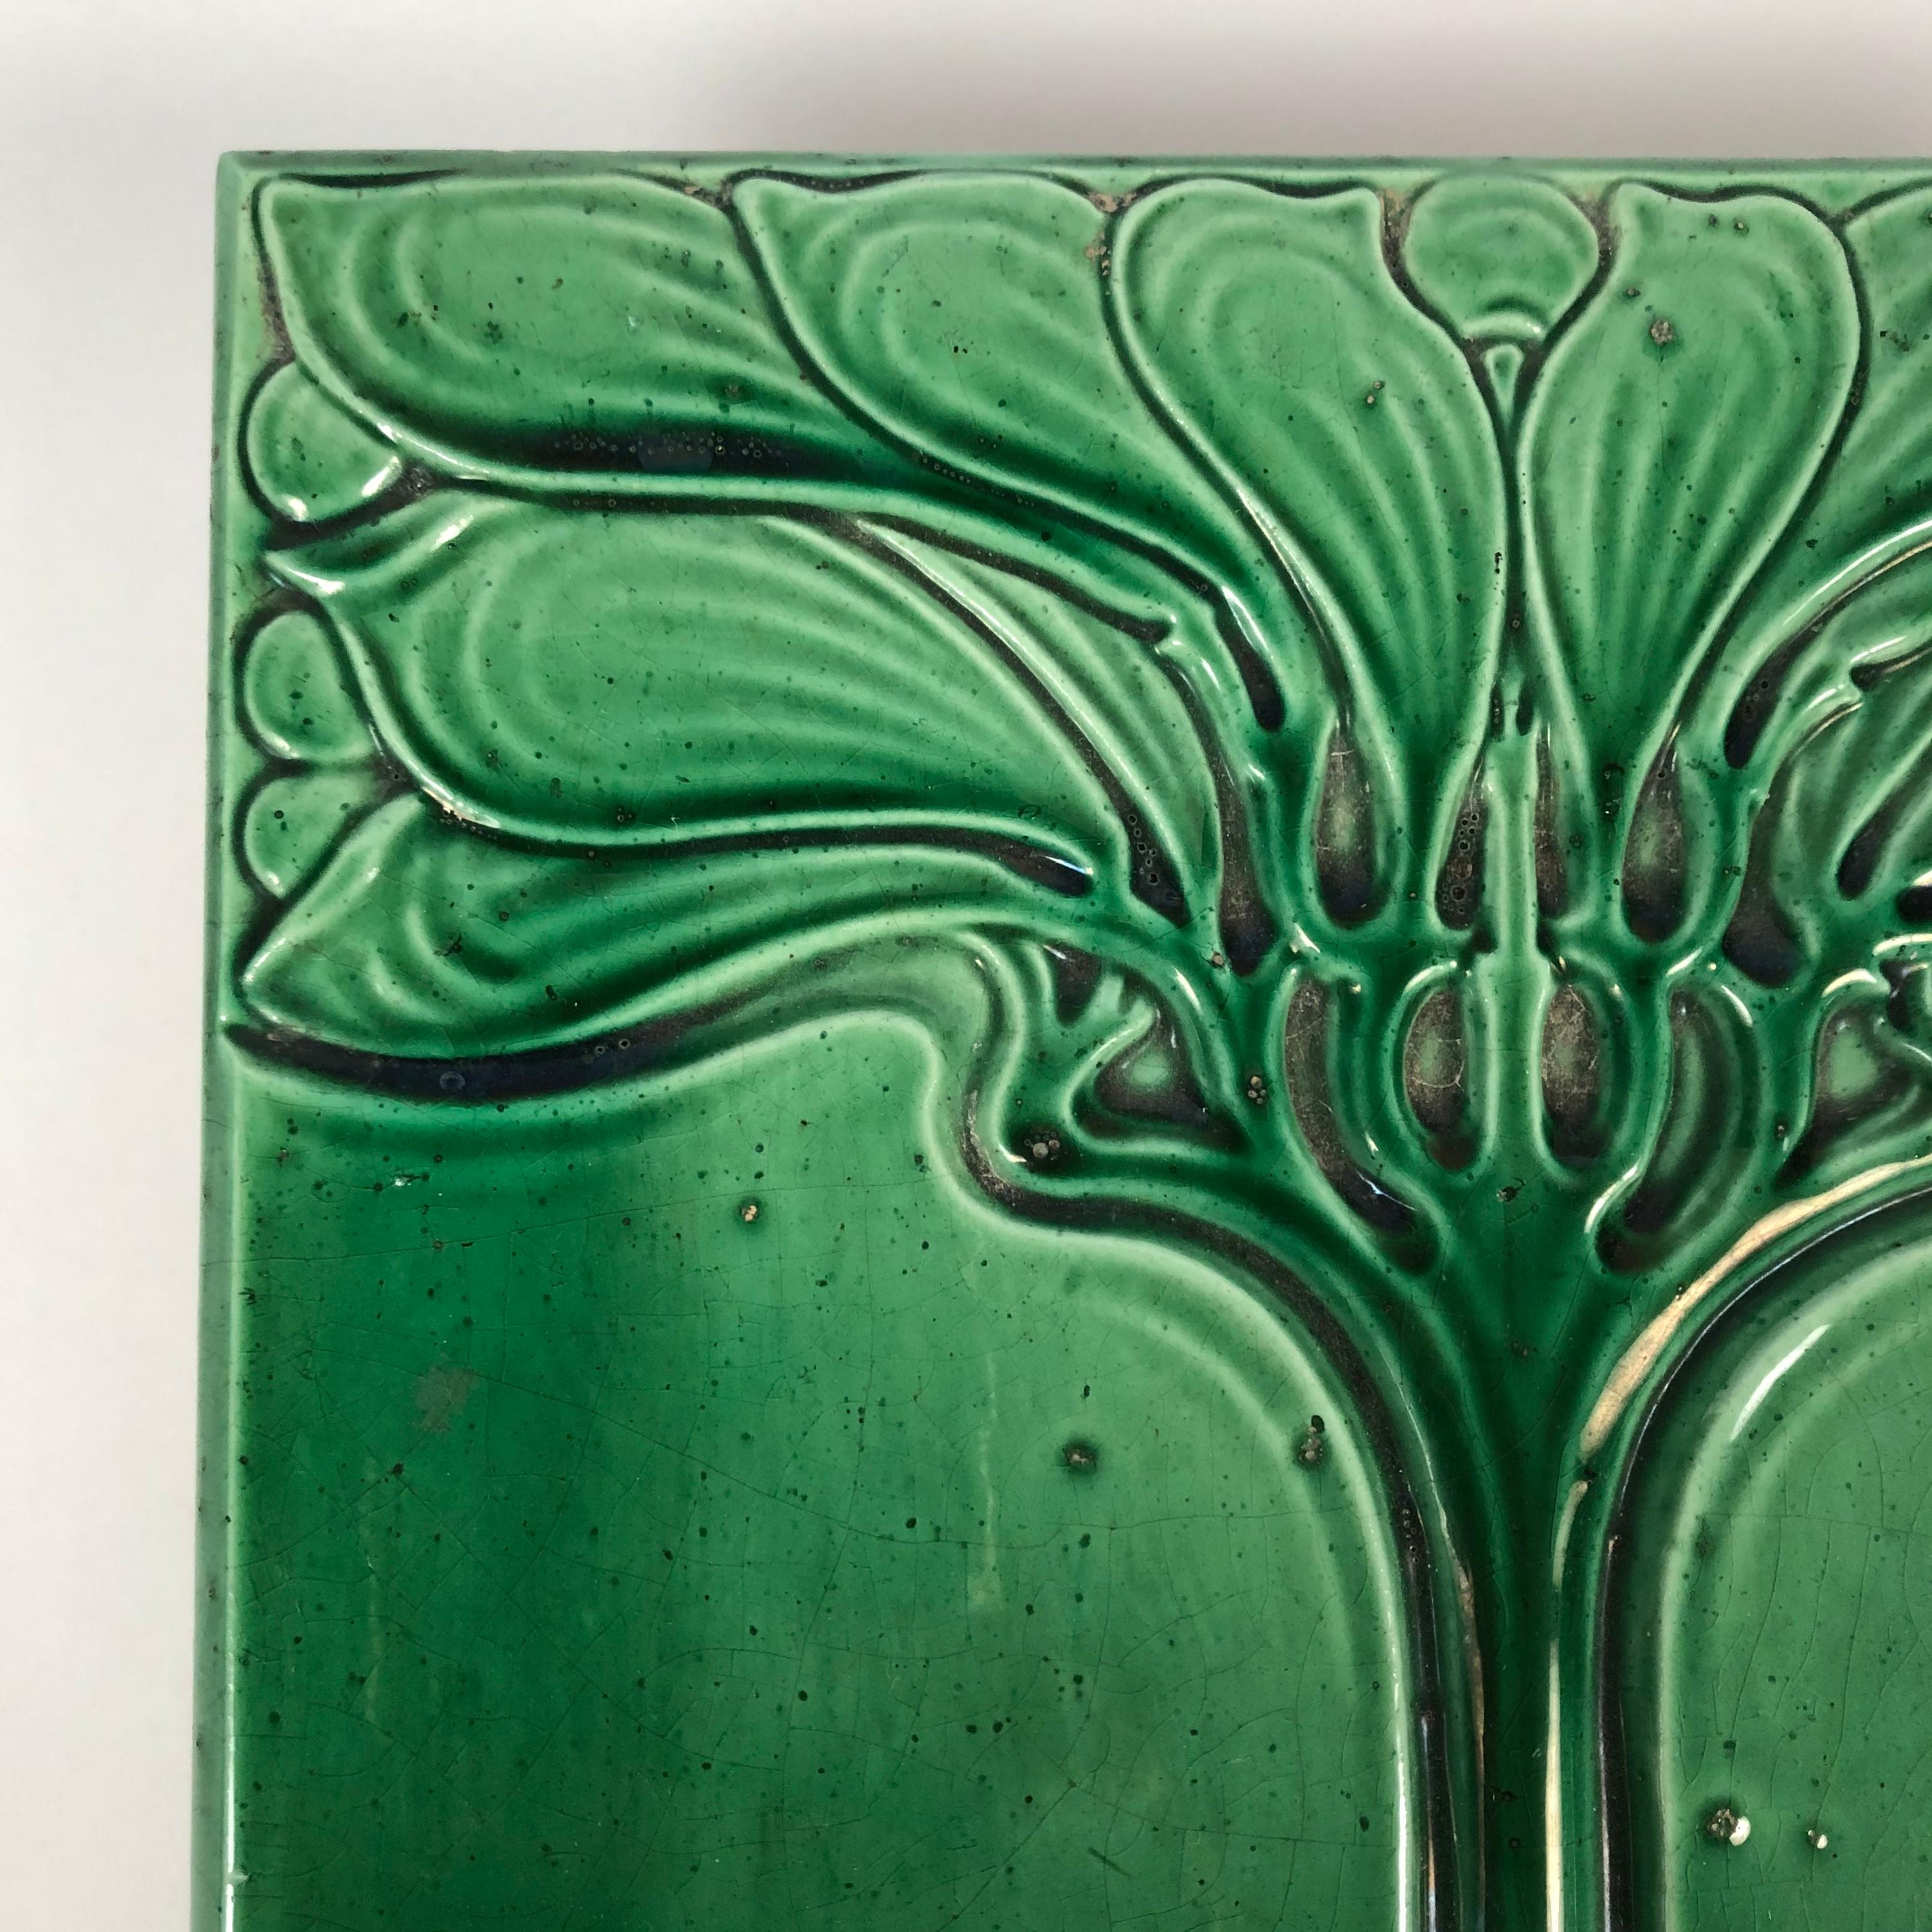 A beautiful Art Nouveau period emerald green glazed ceramic tile decorated with a wonderfully graphic, sinuous, stylized tree.
This tile was originally used in an architectural setting or for a ceramic stove.